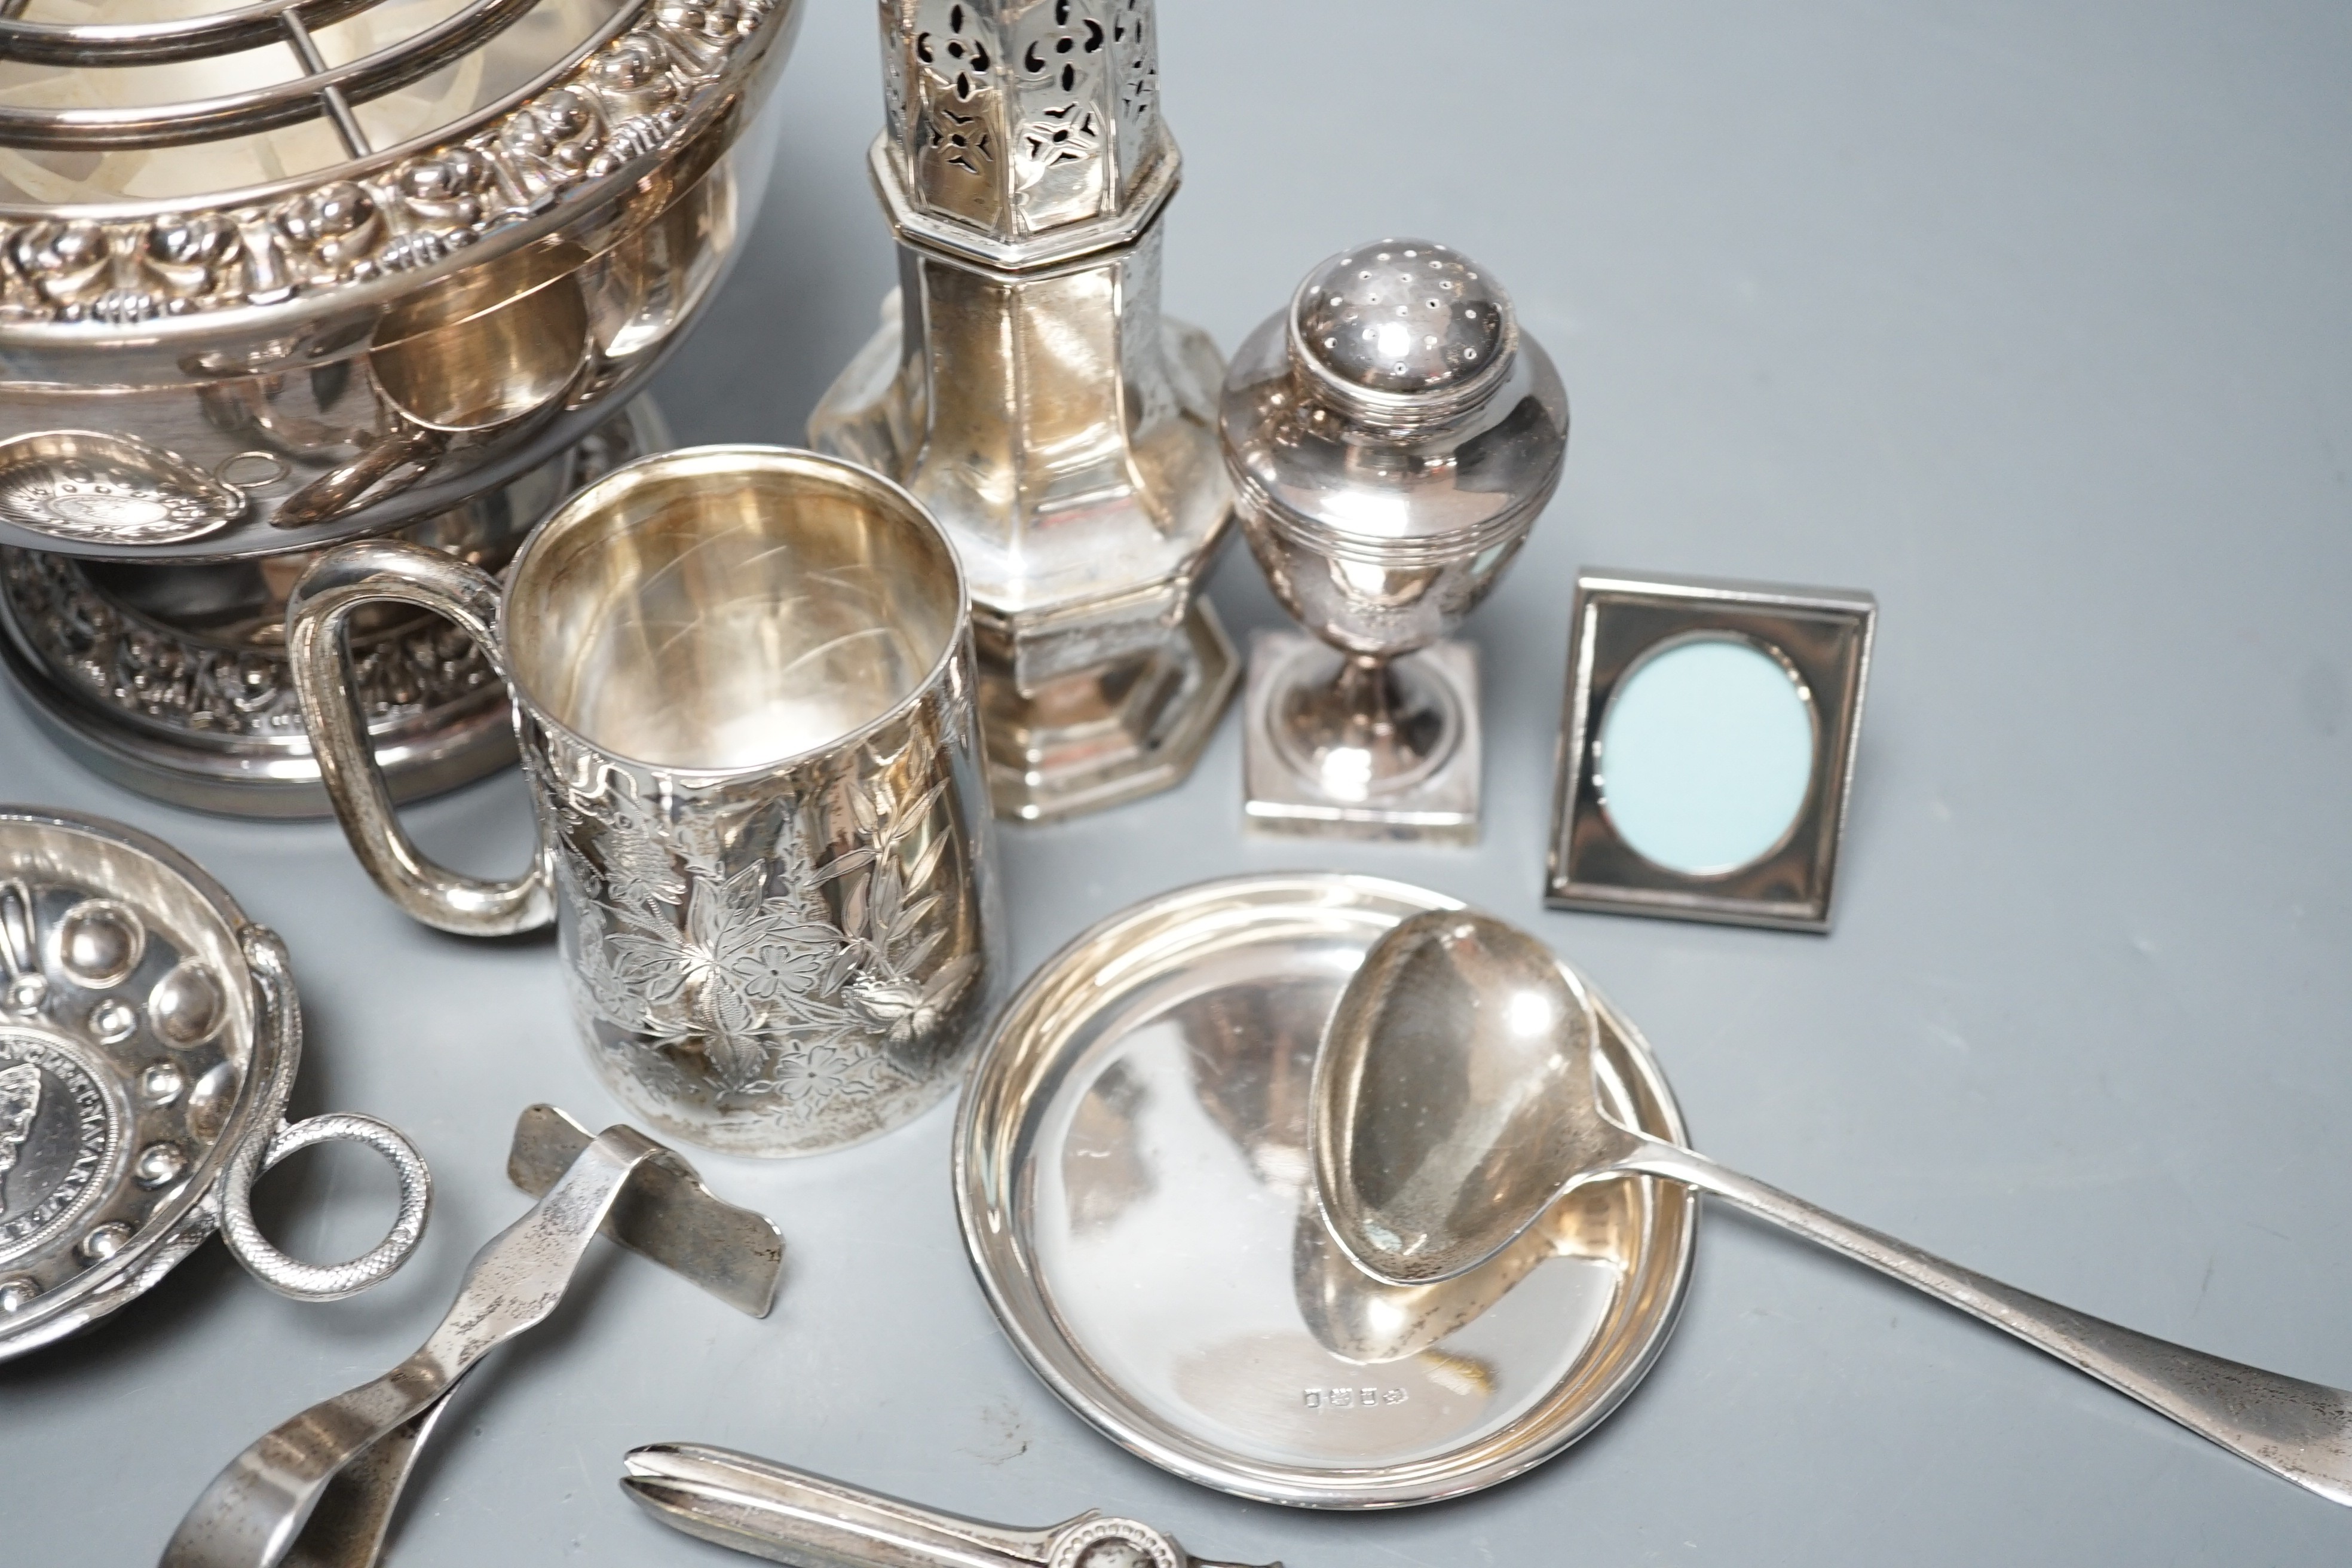 A George III silver vase shaped pepperette, Richard Evans? London, 1788, 88mm, a Victorian silver christening mug, a later silver sugar caster, a French white metal taste vin and other sundry silver and plated items.